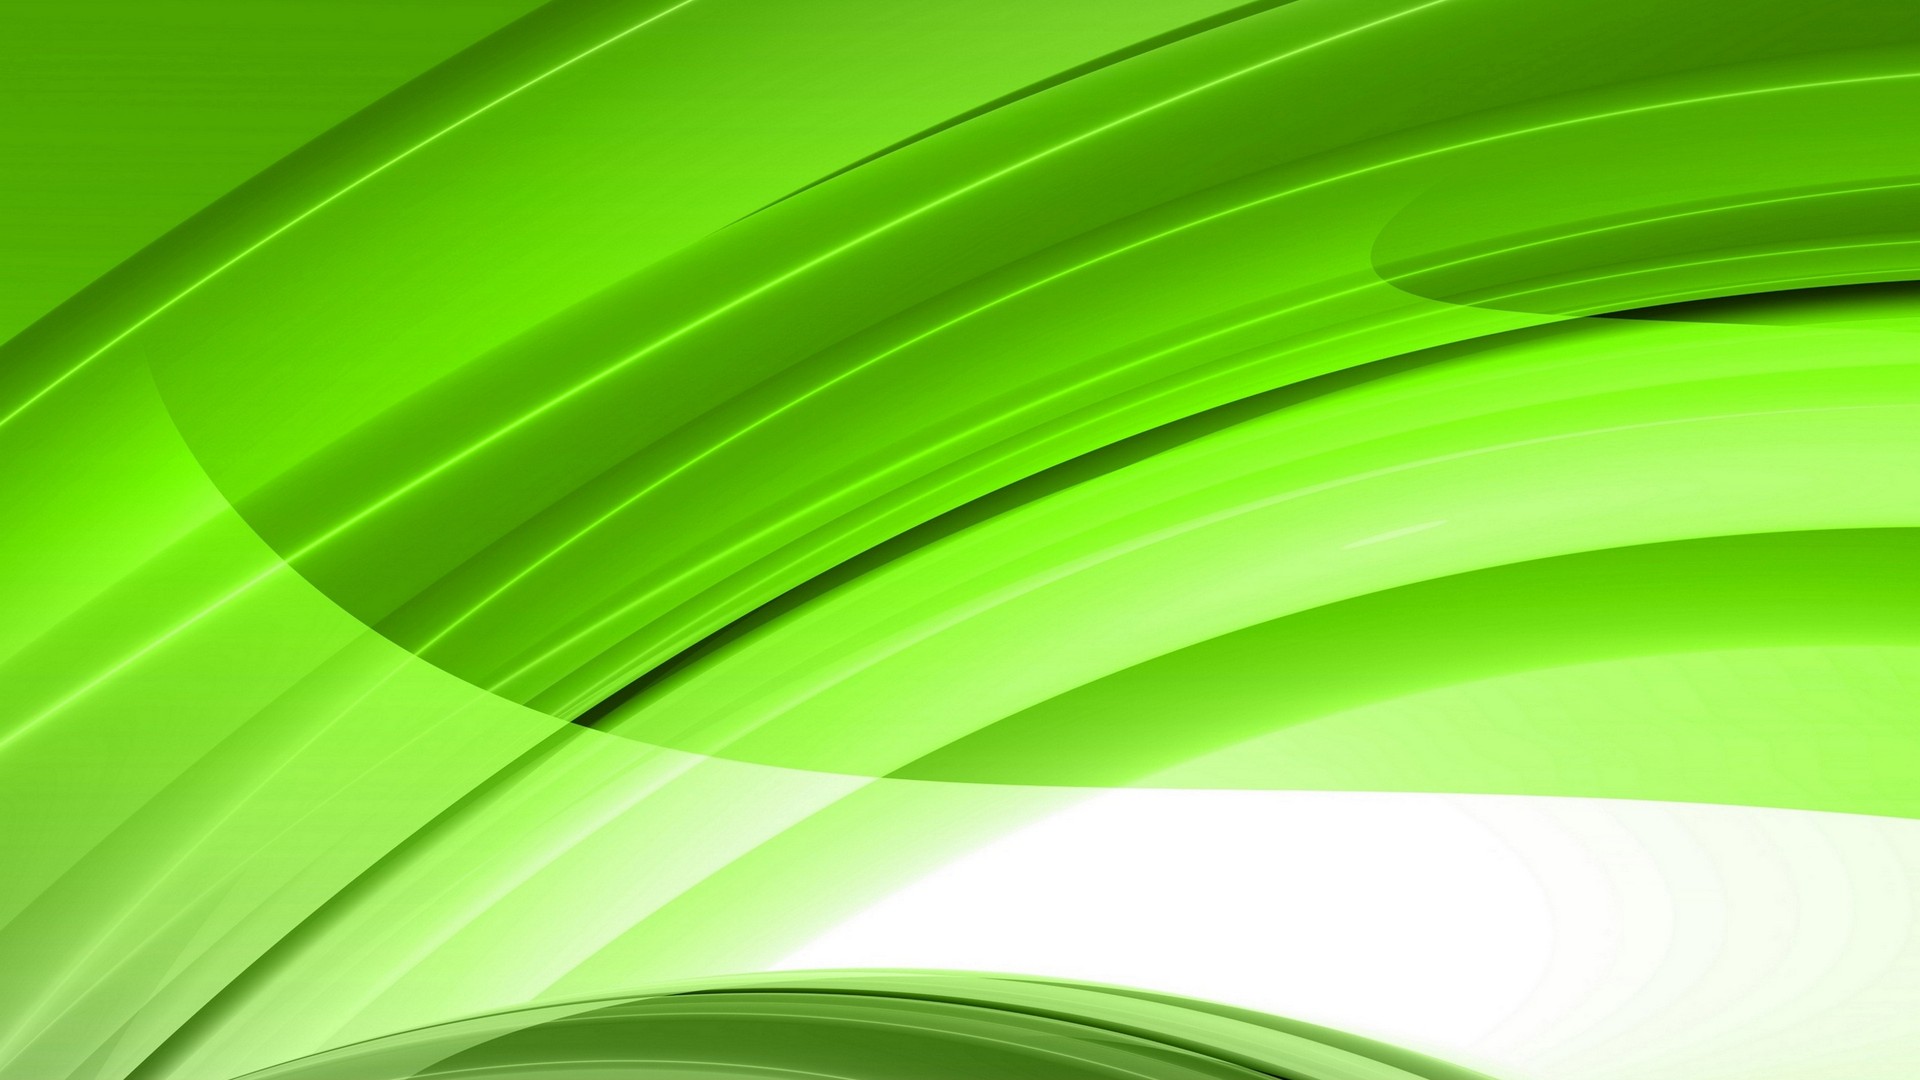 Light Green Desktop Backgrounds with image resolution 1920x1080 pixel. You can make this wallpaper for your Desktop Computer Backgrounds, Mac Wallpapers, Android Lock screen or iPhone Screensavers